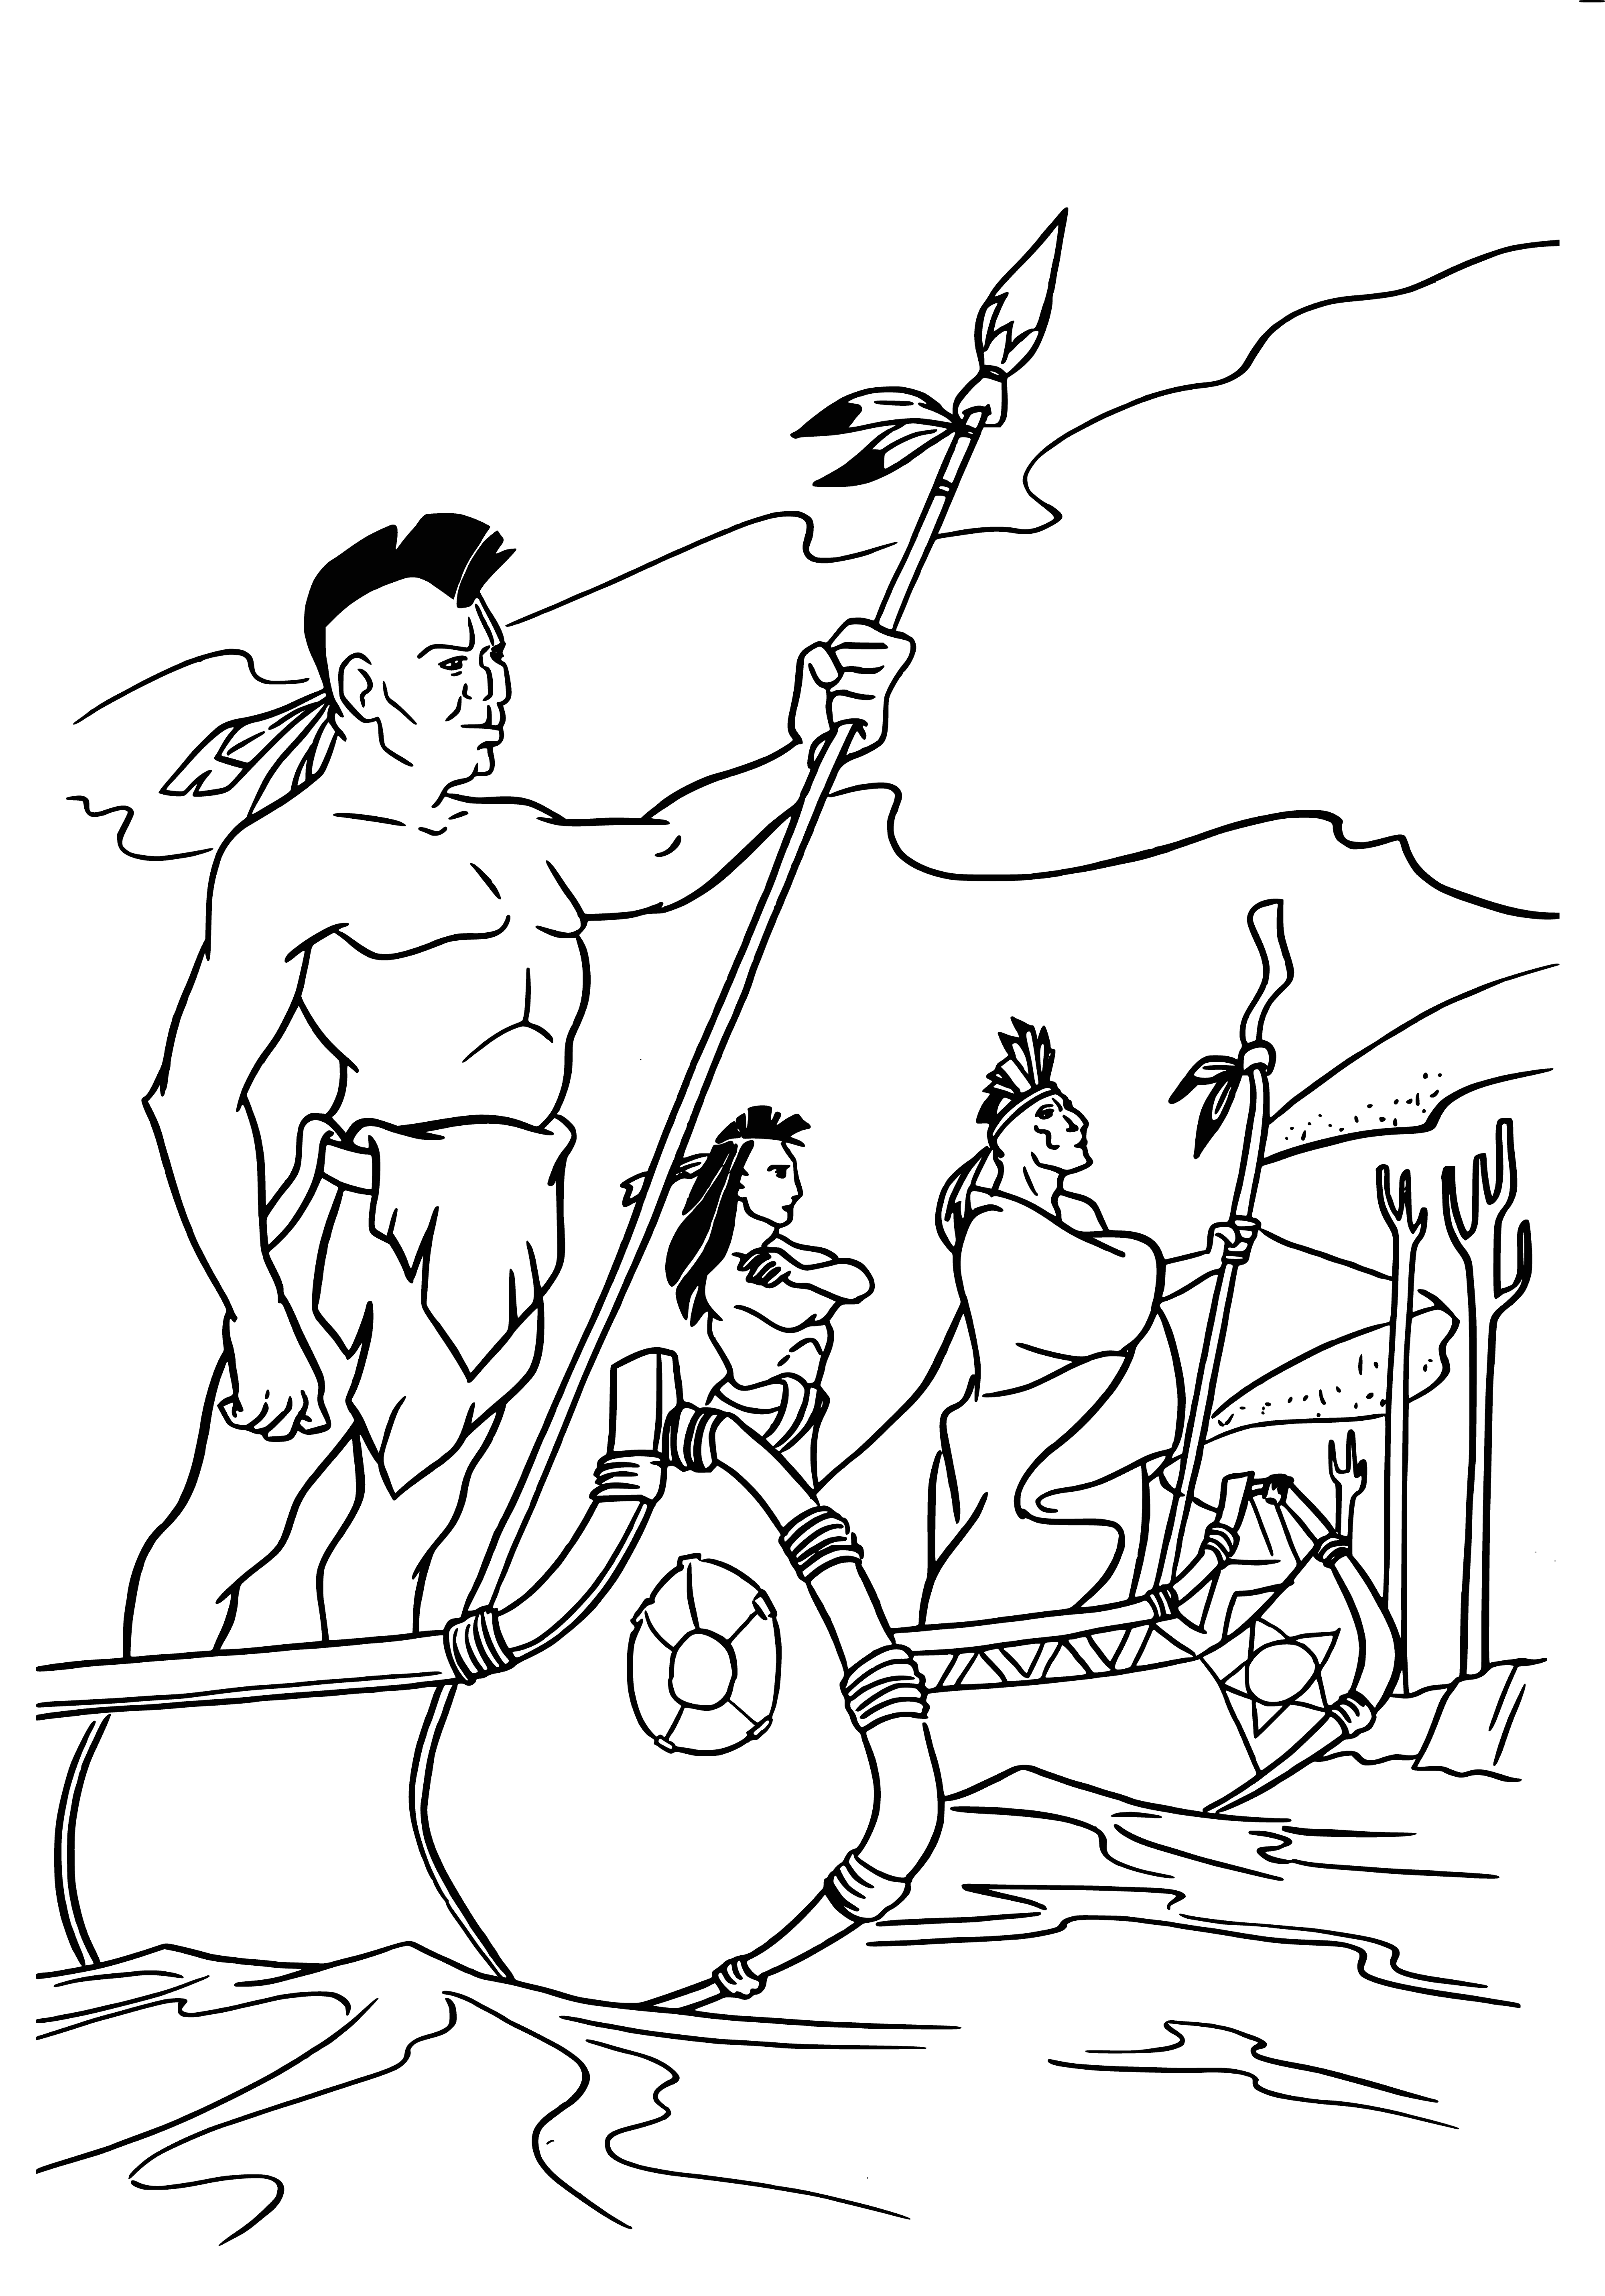 Indians coloring page